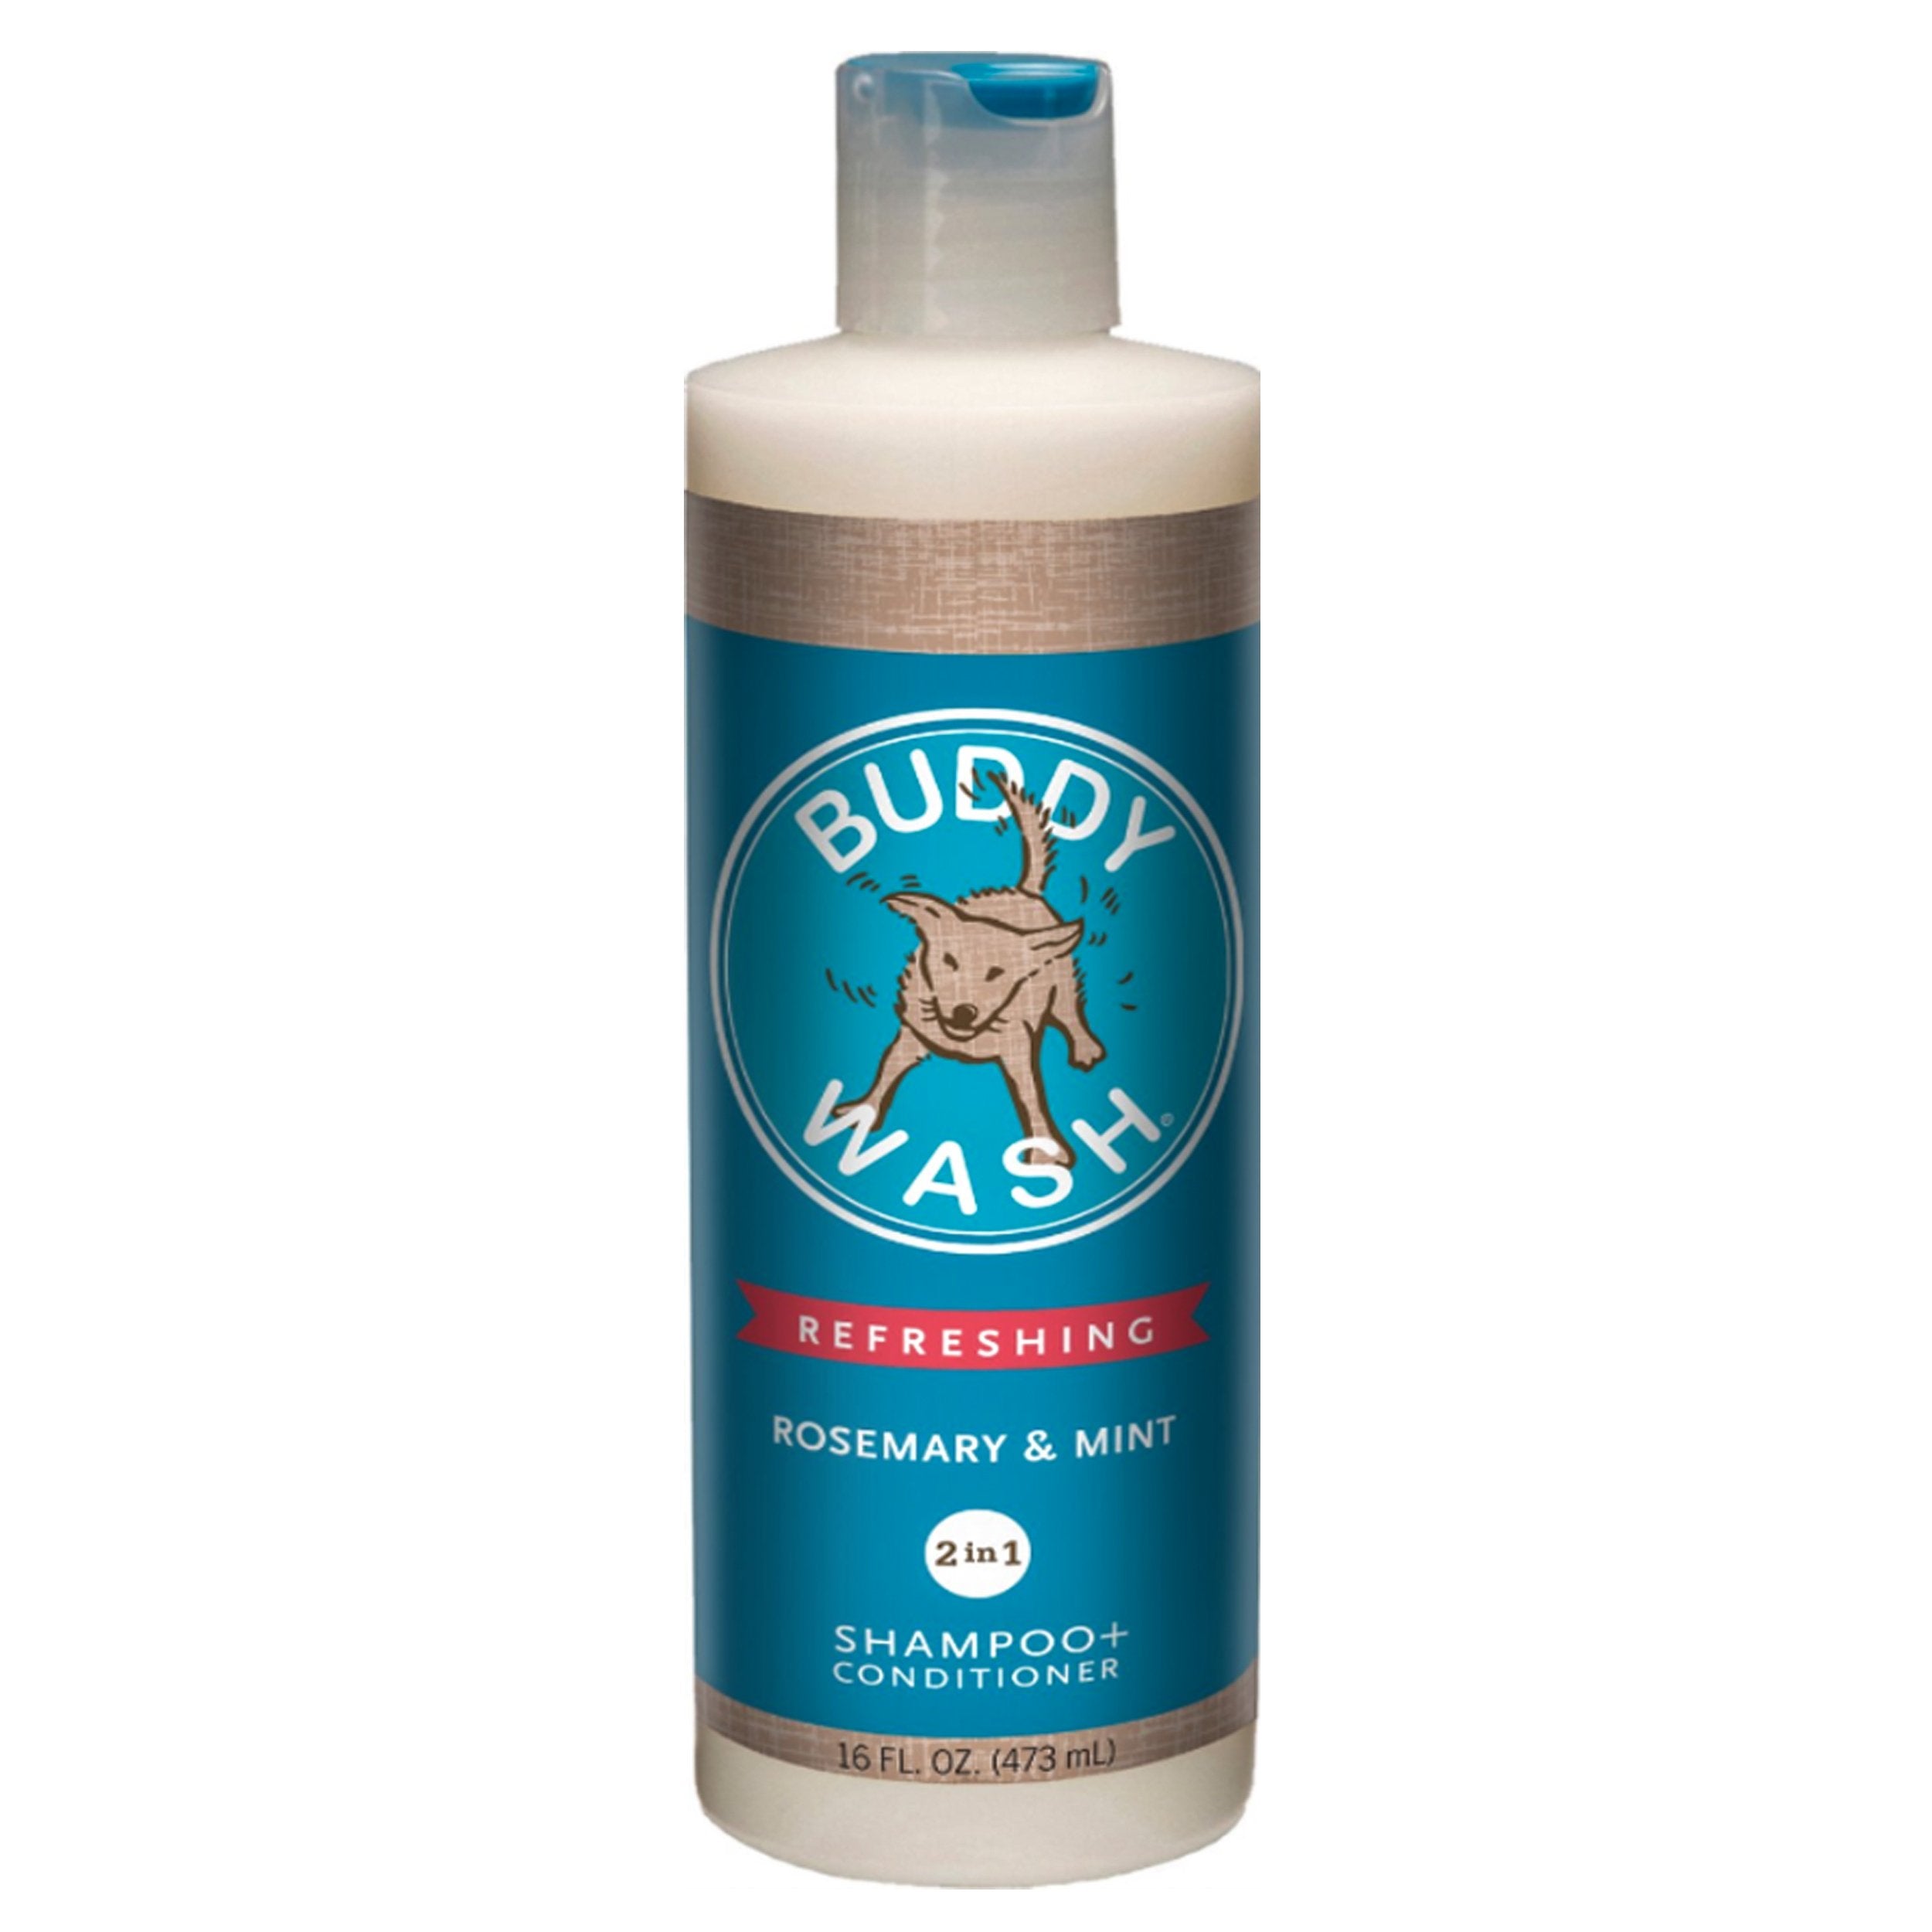 Buddy Wash Rosemary & Mint 2in1 Shampoo and Conditioner 16 fl oz for dogs Fresh and Clean Coat Softener Description Specially Formulated to Clean and Moisturize dogs coat and creates soothing bath experience and calming scent Refreshing feeling